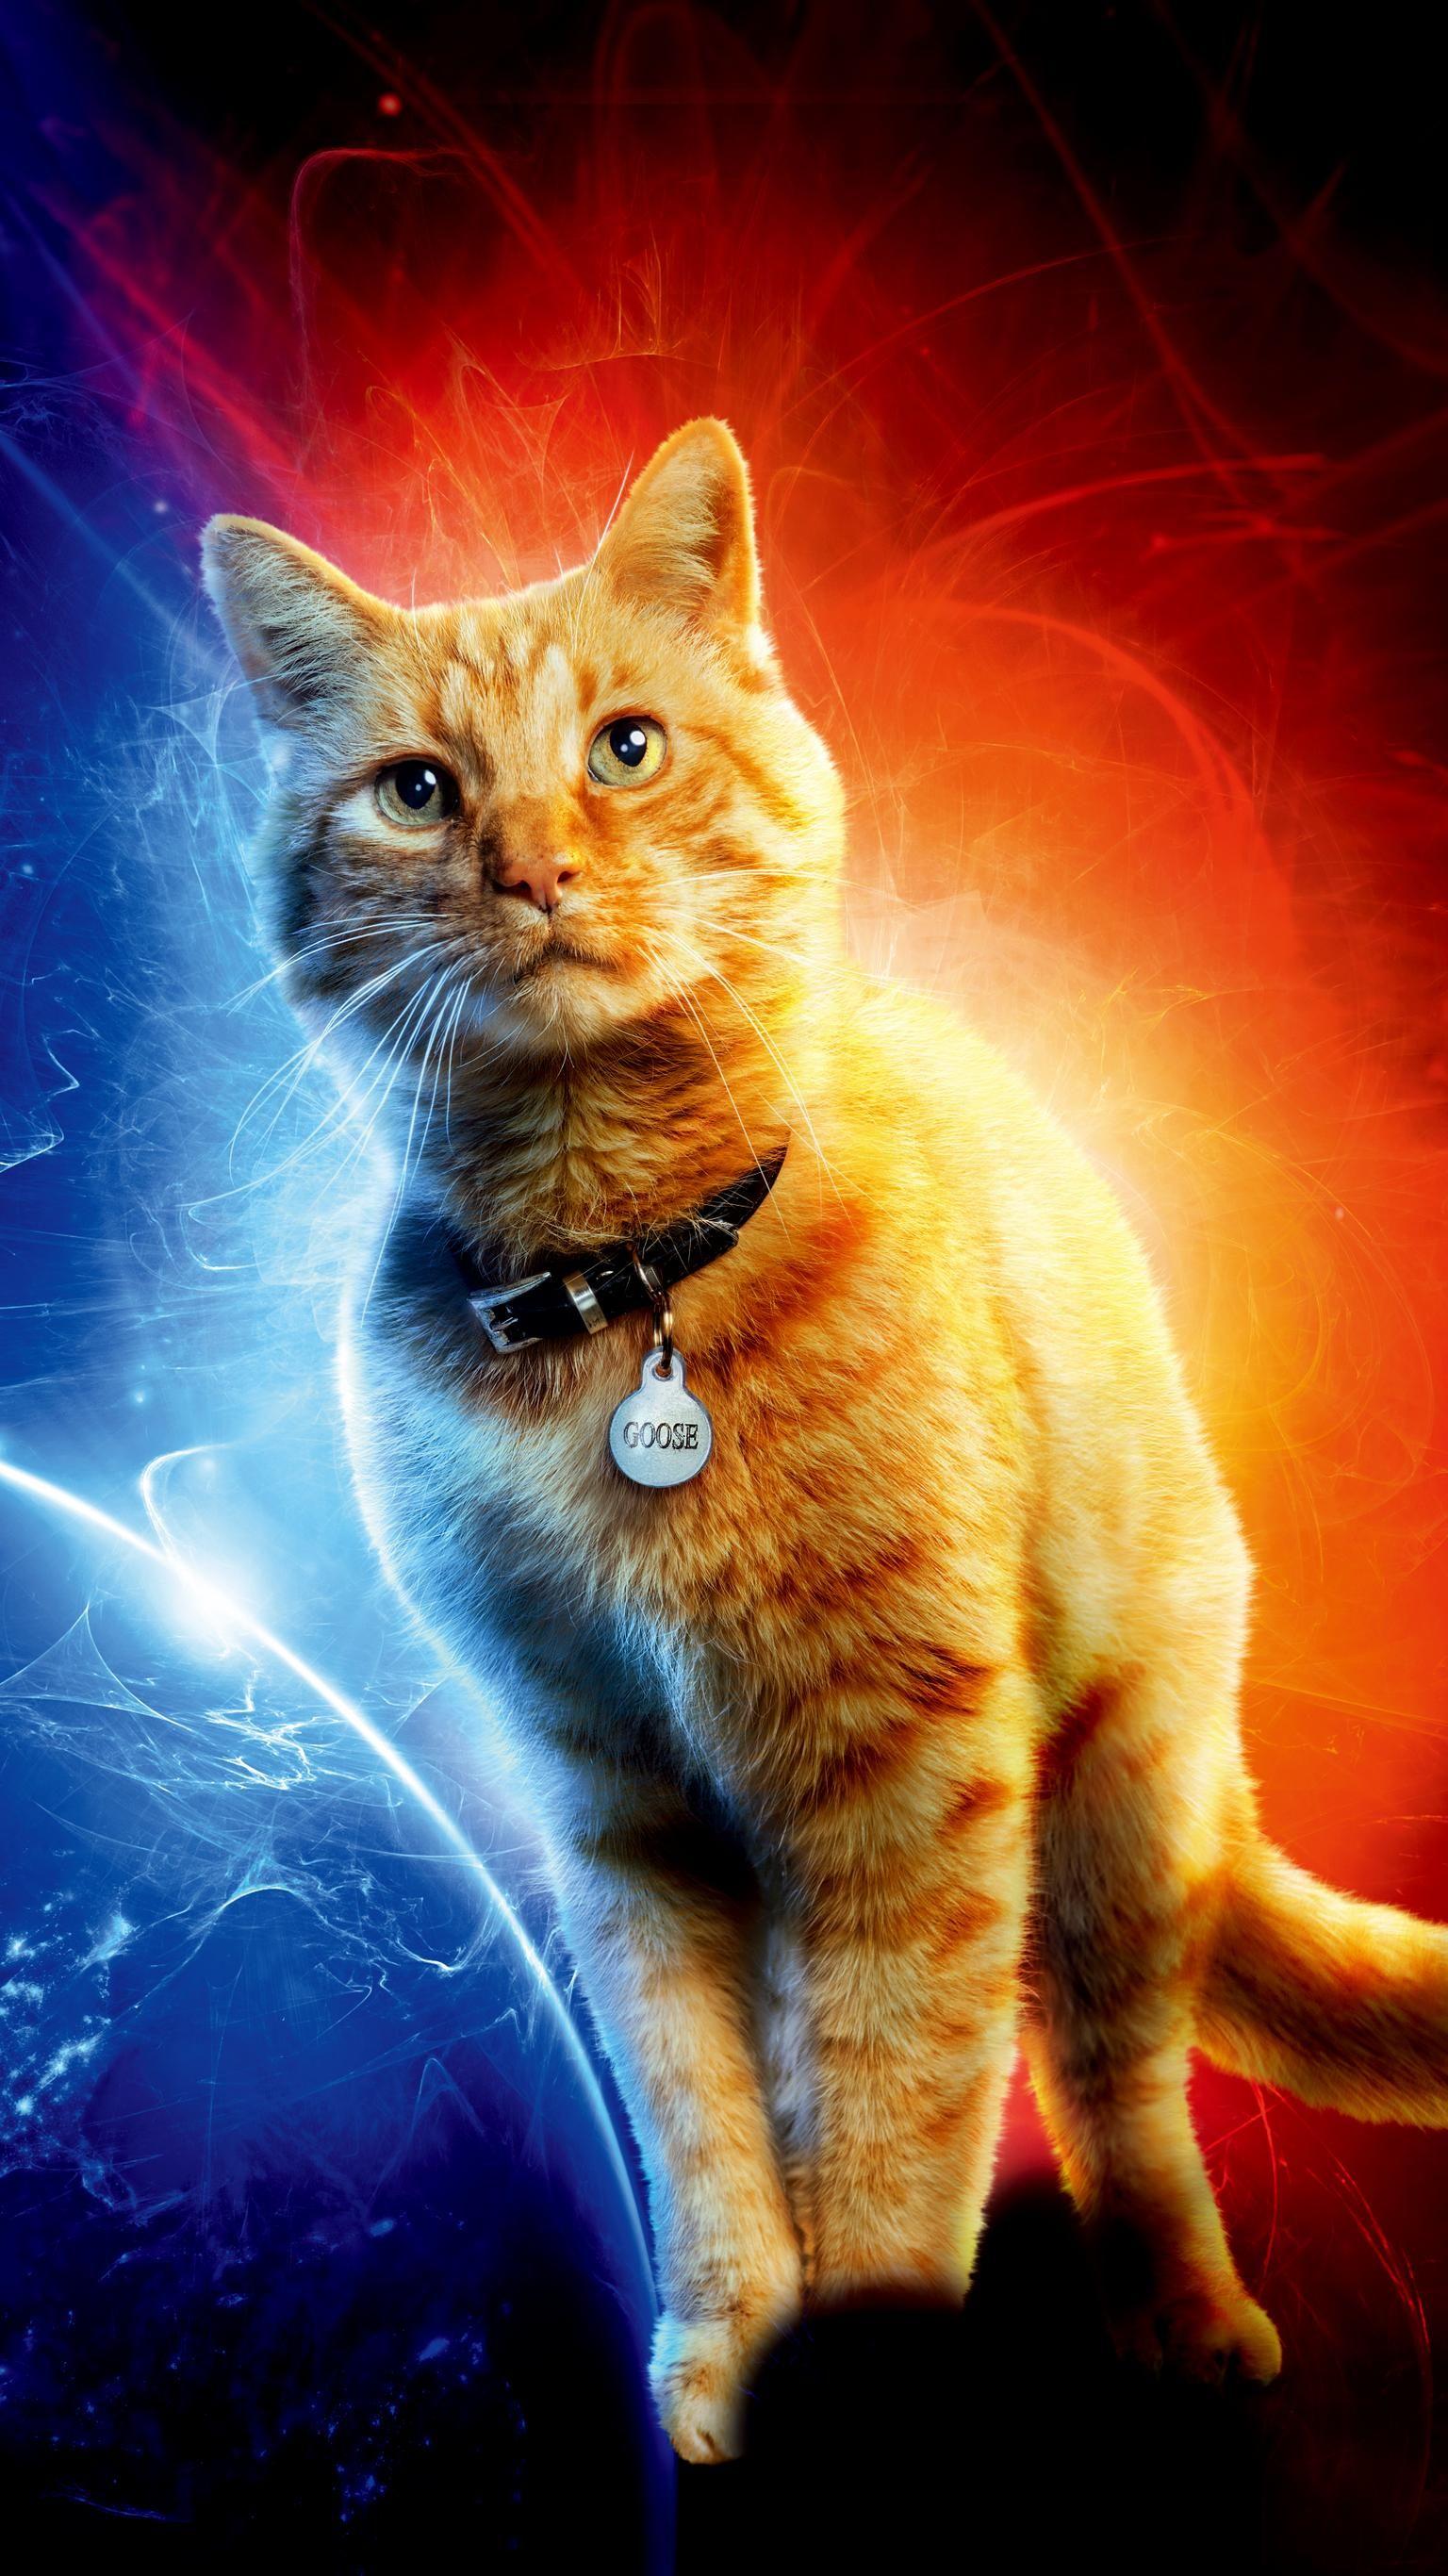 Goose The Cat In Captain Marvel Image Wallpapers